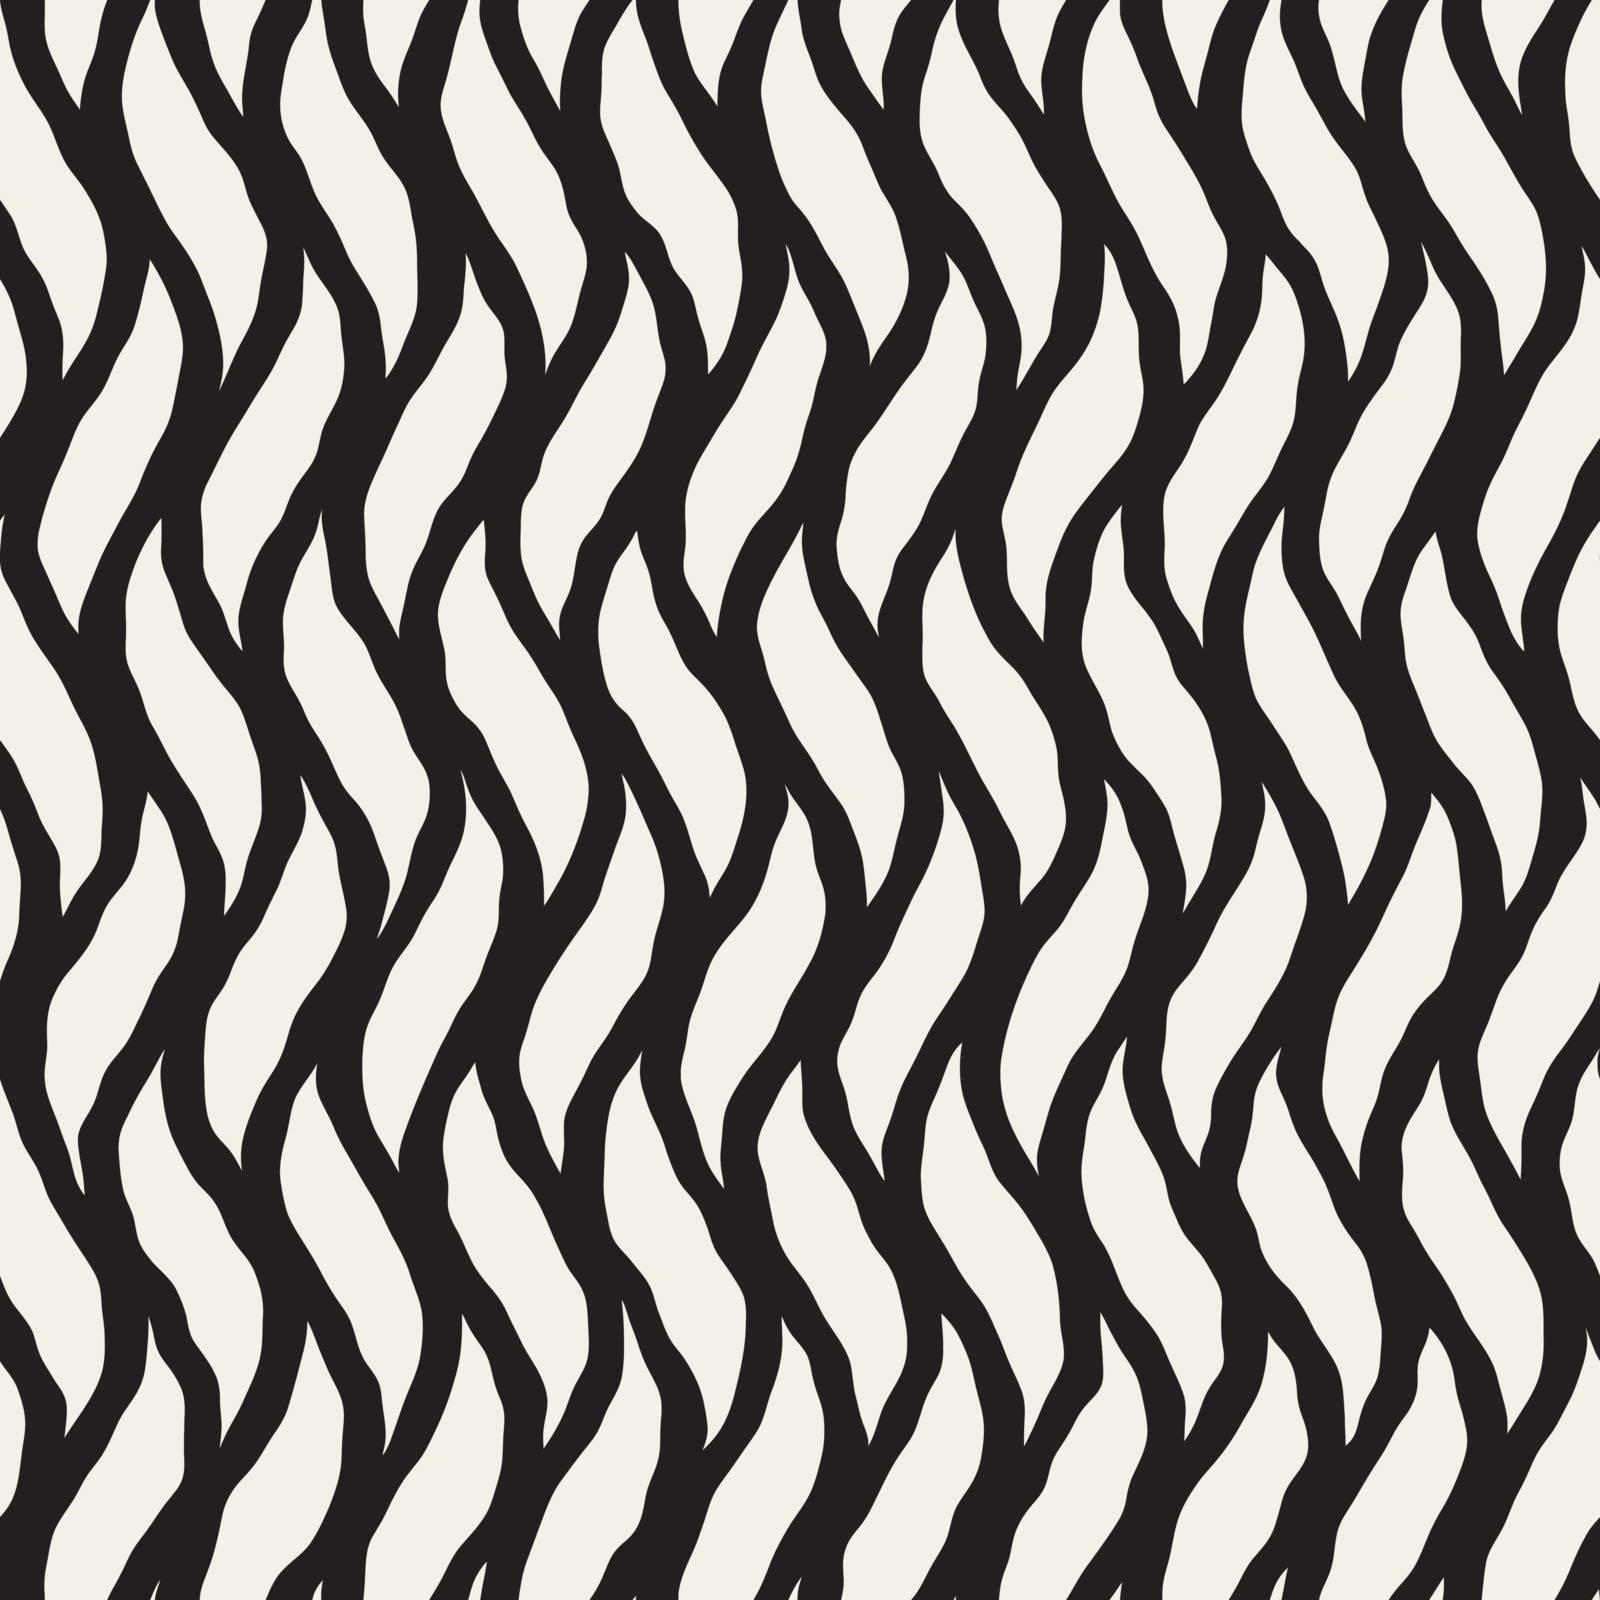 Vector Seamless Hand Drawn Vertical Wavy Lines Pattern by Samolevsky